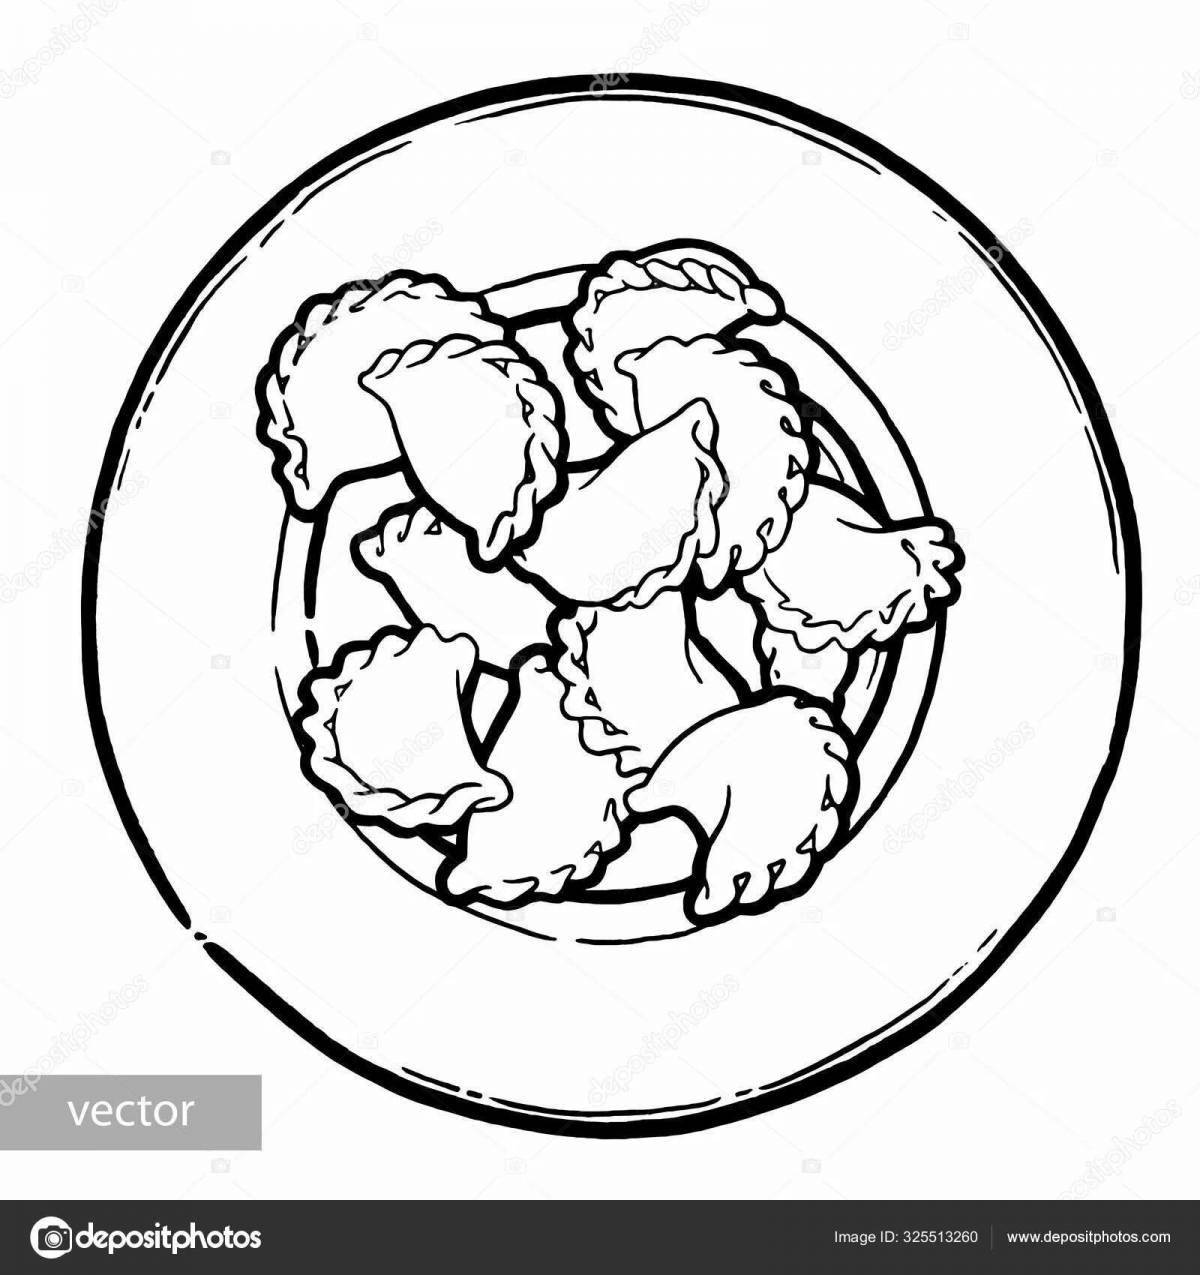 Innovative dumpling coloring page